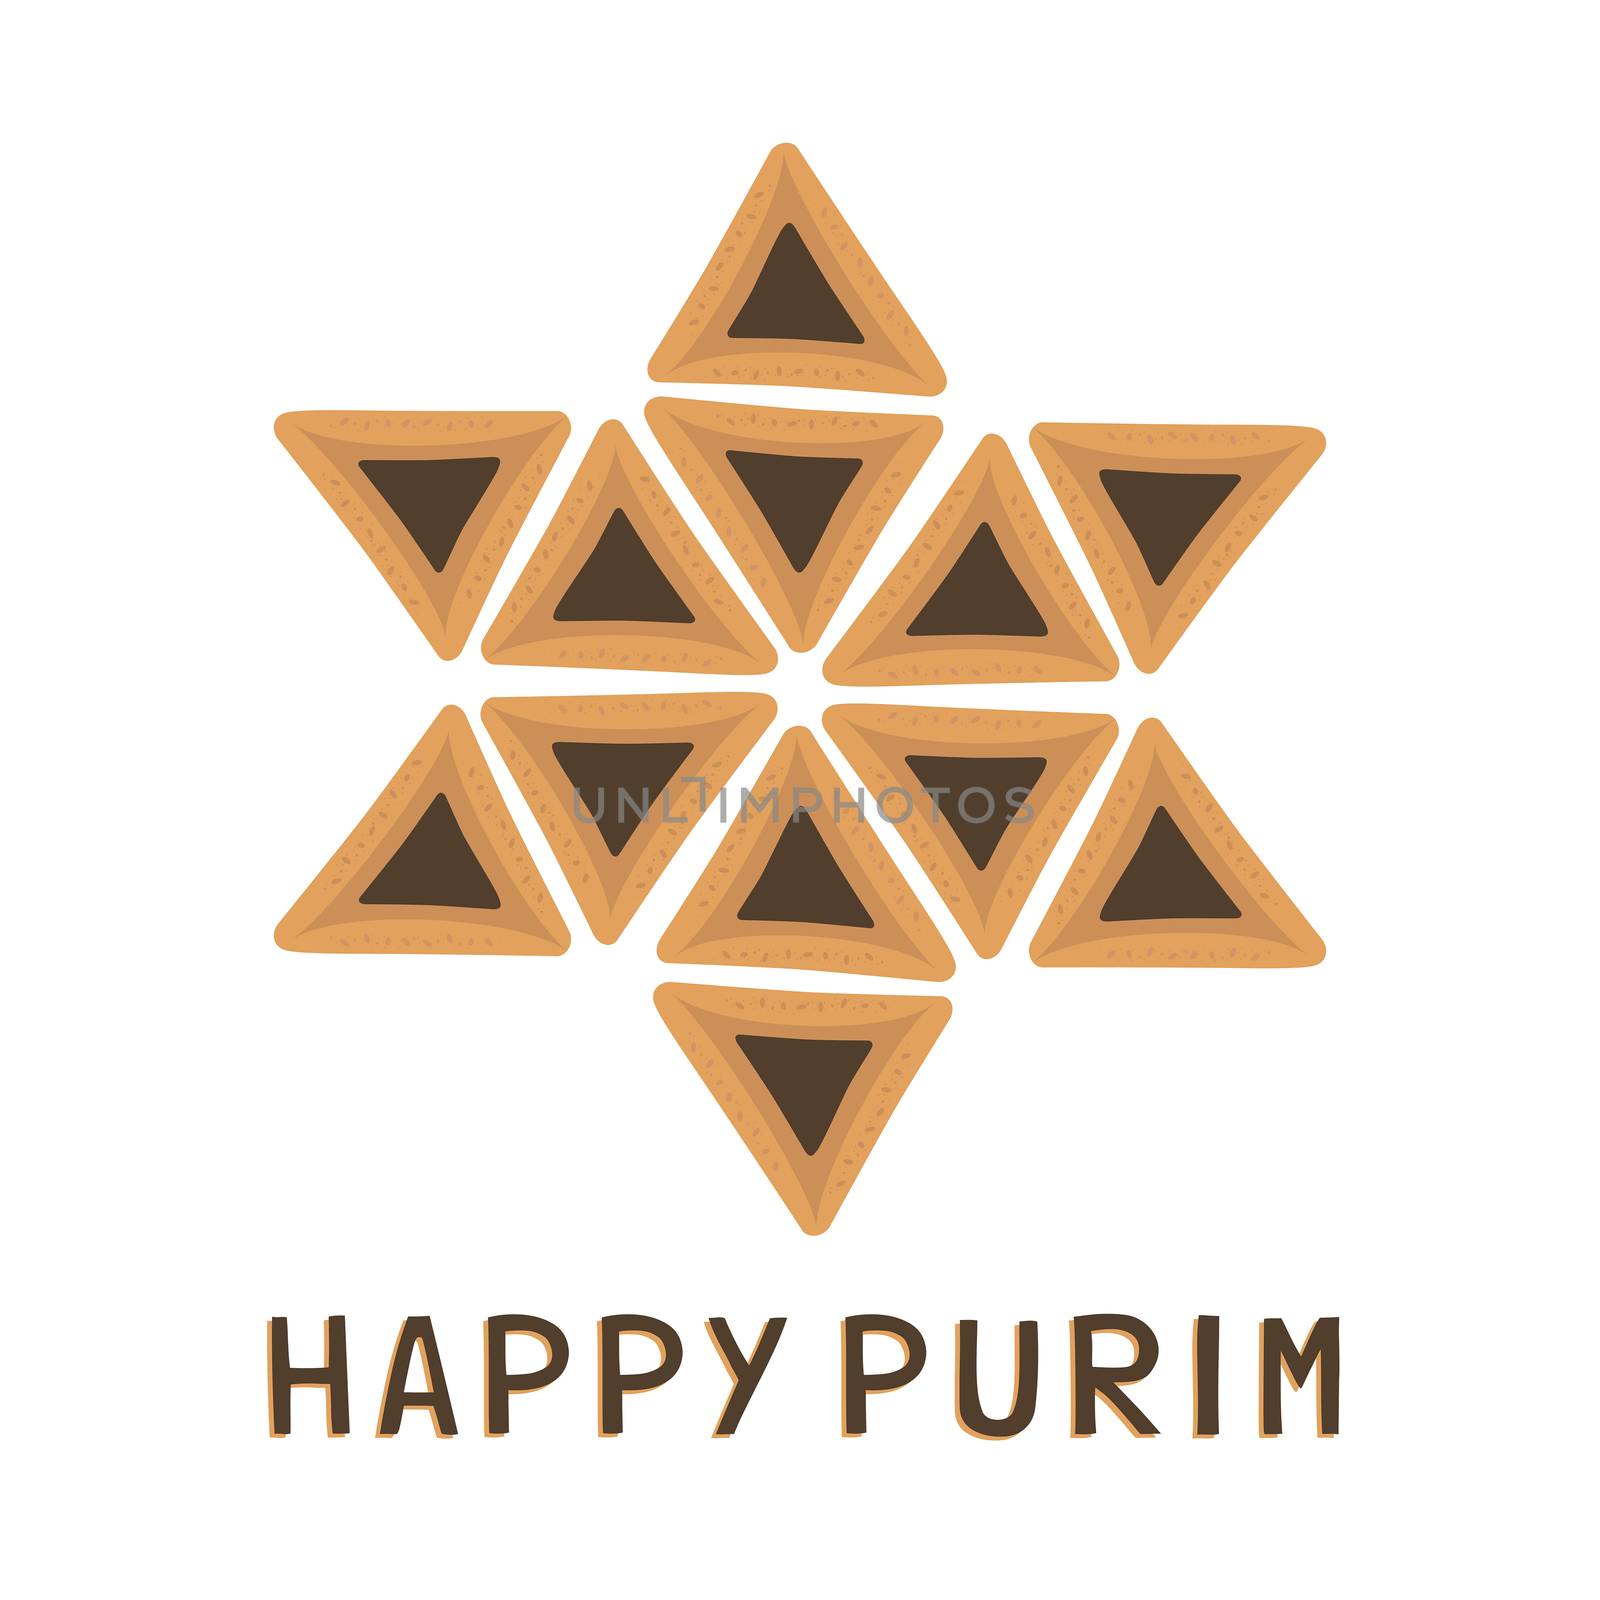 Purim holiday flat design icons of hamantashs in star of david shape with text in english "Happy Purim". Vector eps10 illustration.